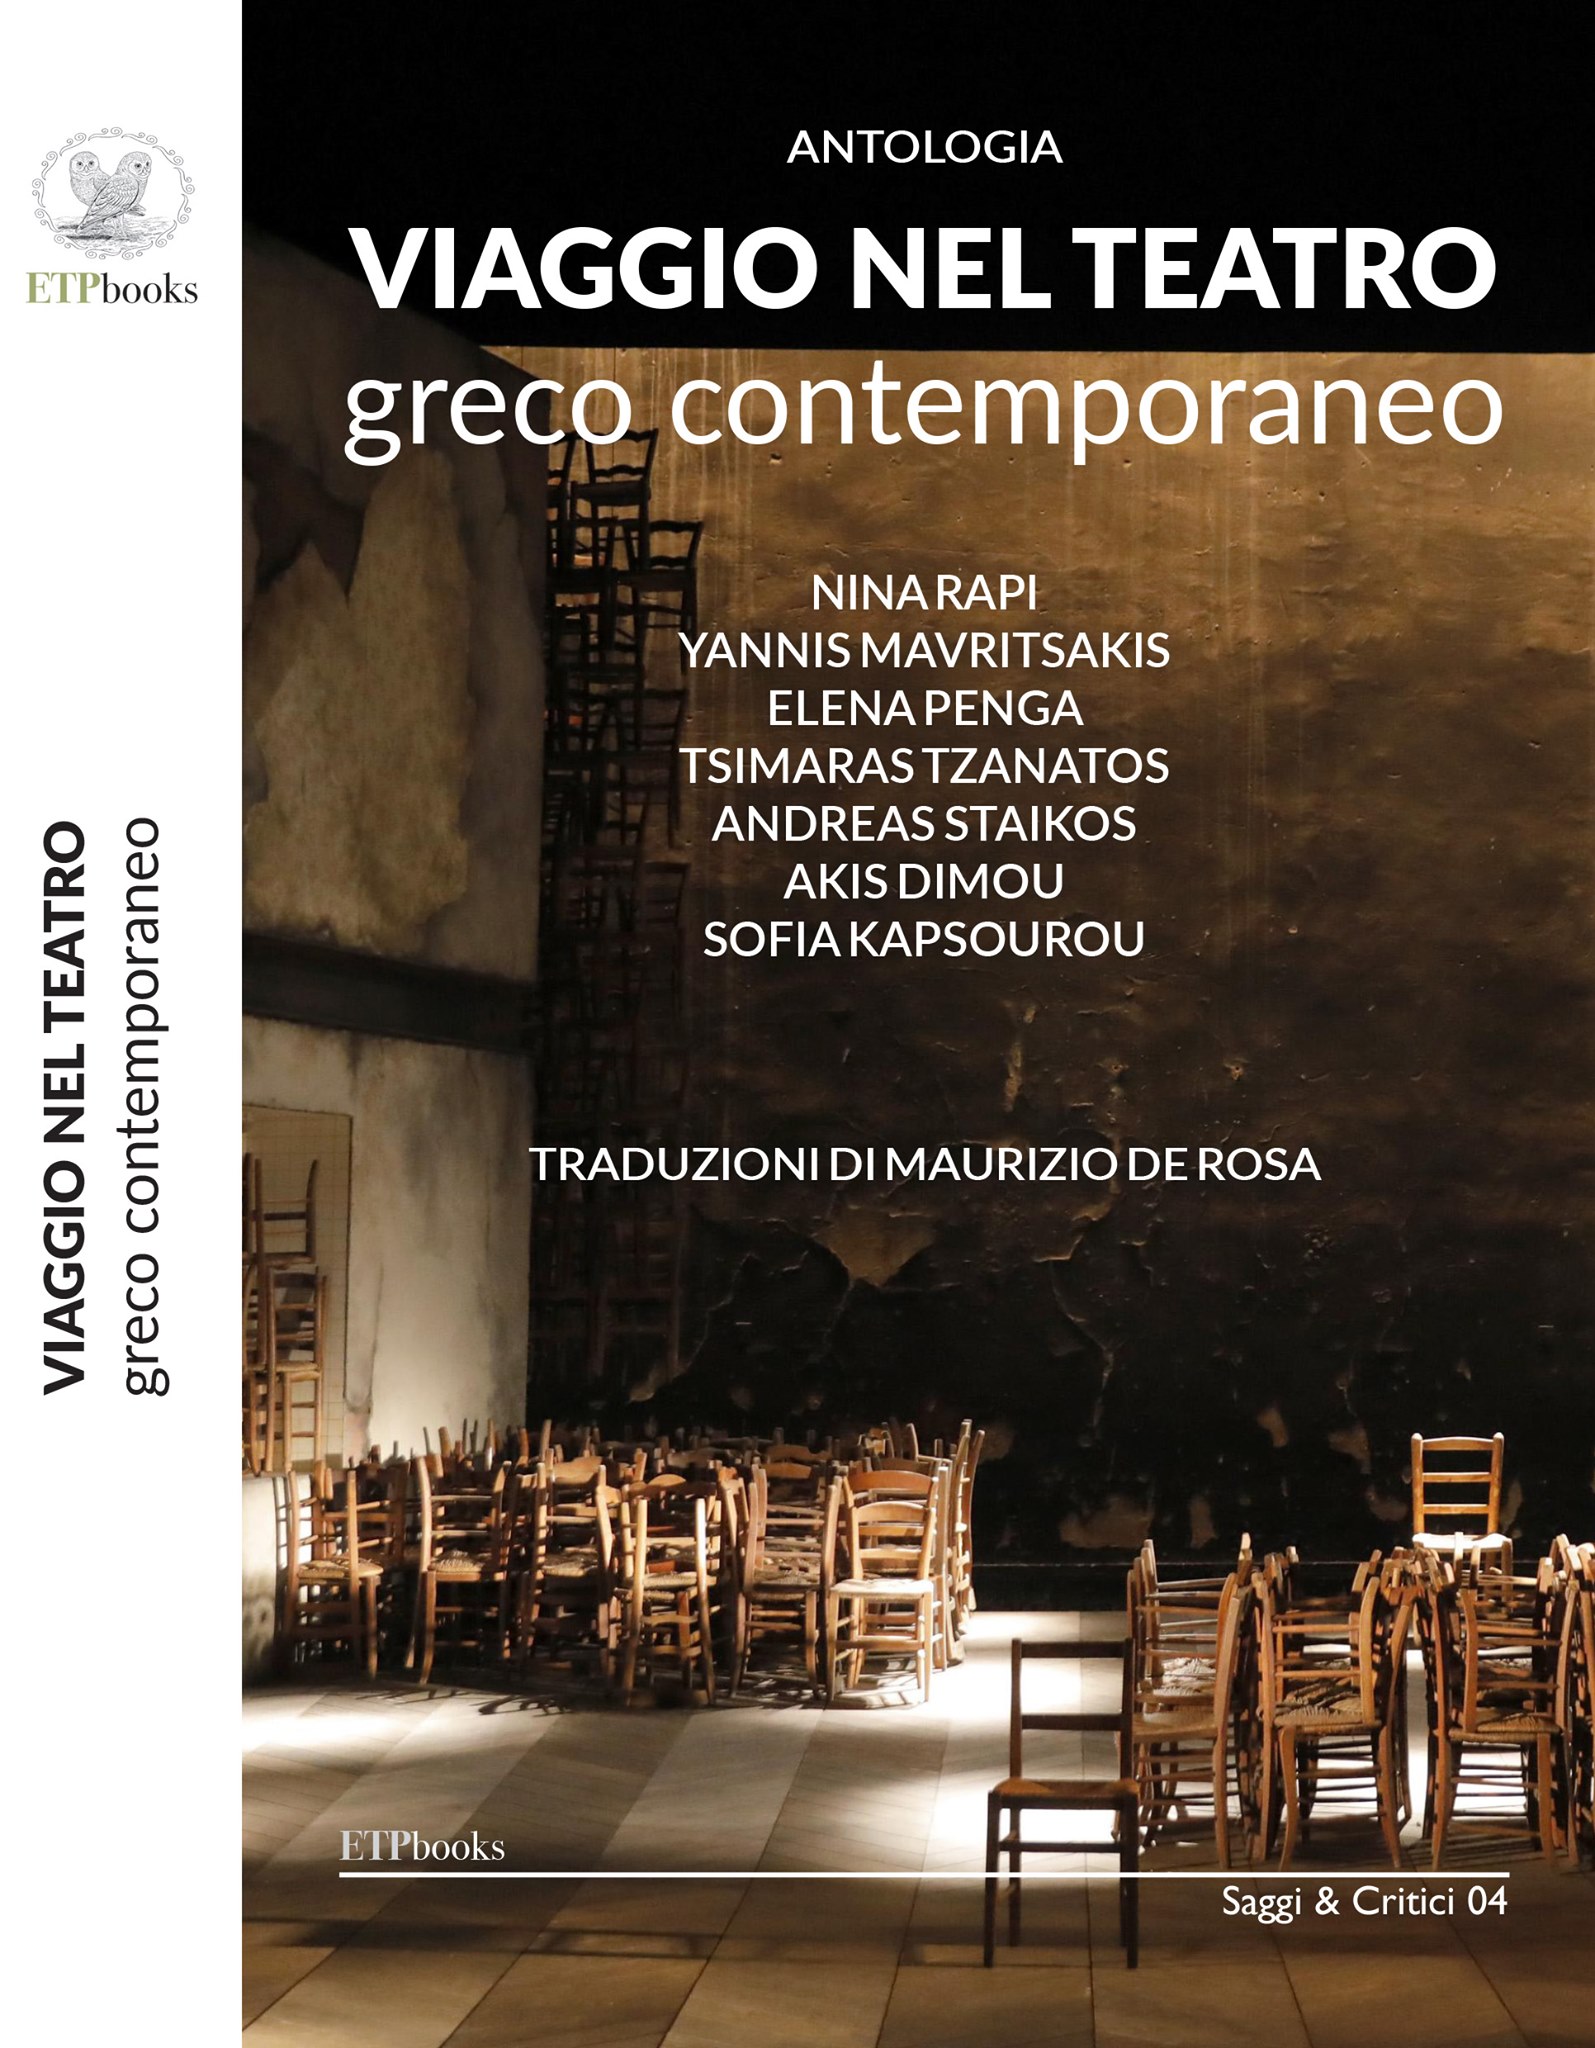 ANGELSTATE Translated Into Italian & Published In The Anthology VIAGGIO NEL TEATRO GRECO CONTEMPORANEO, June 2019